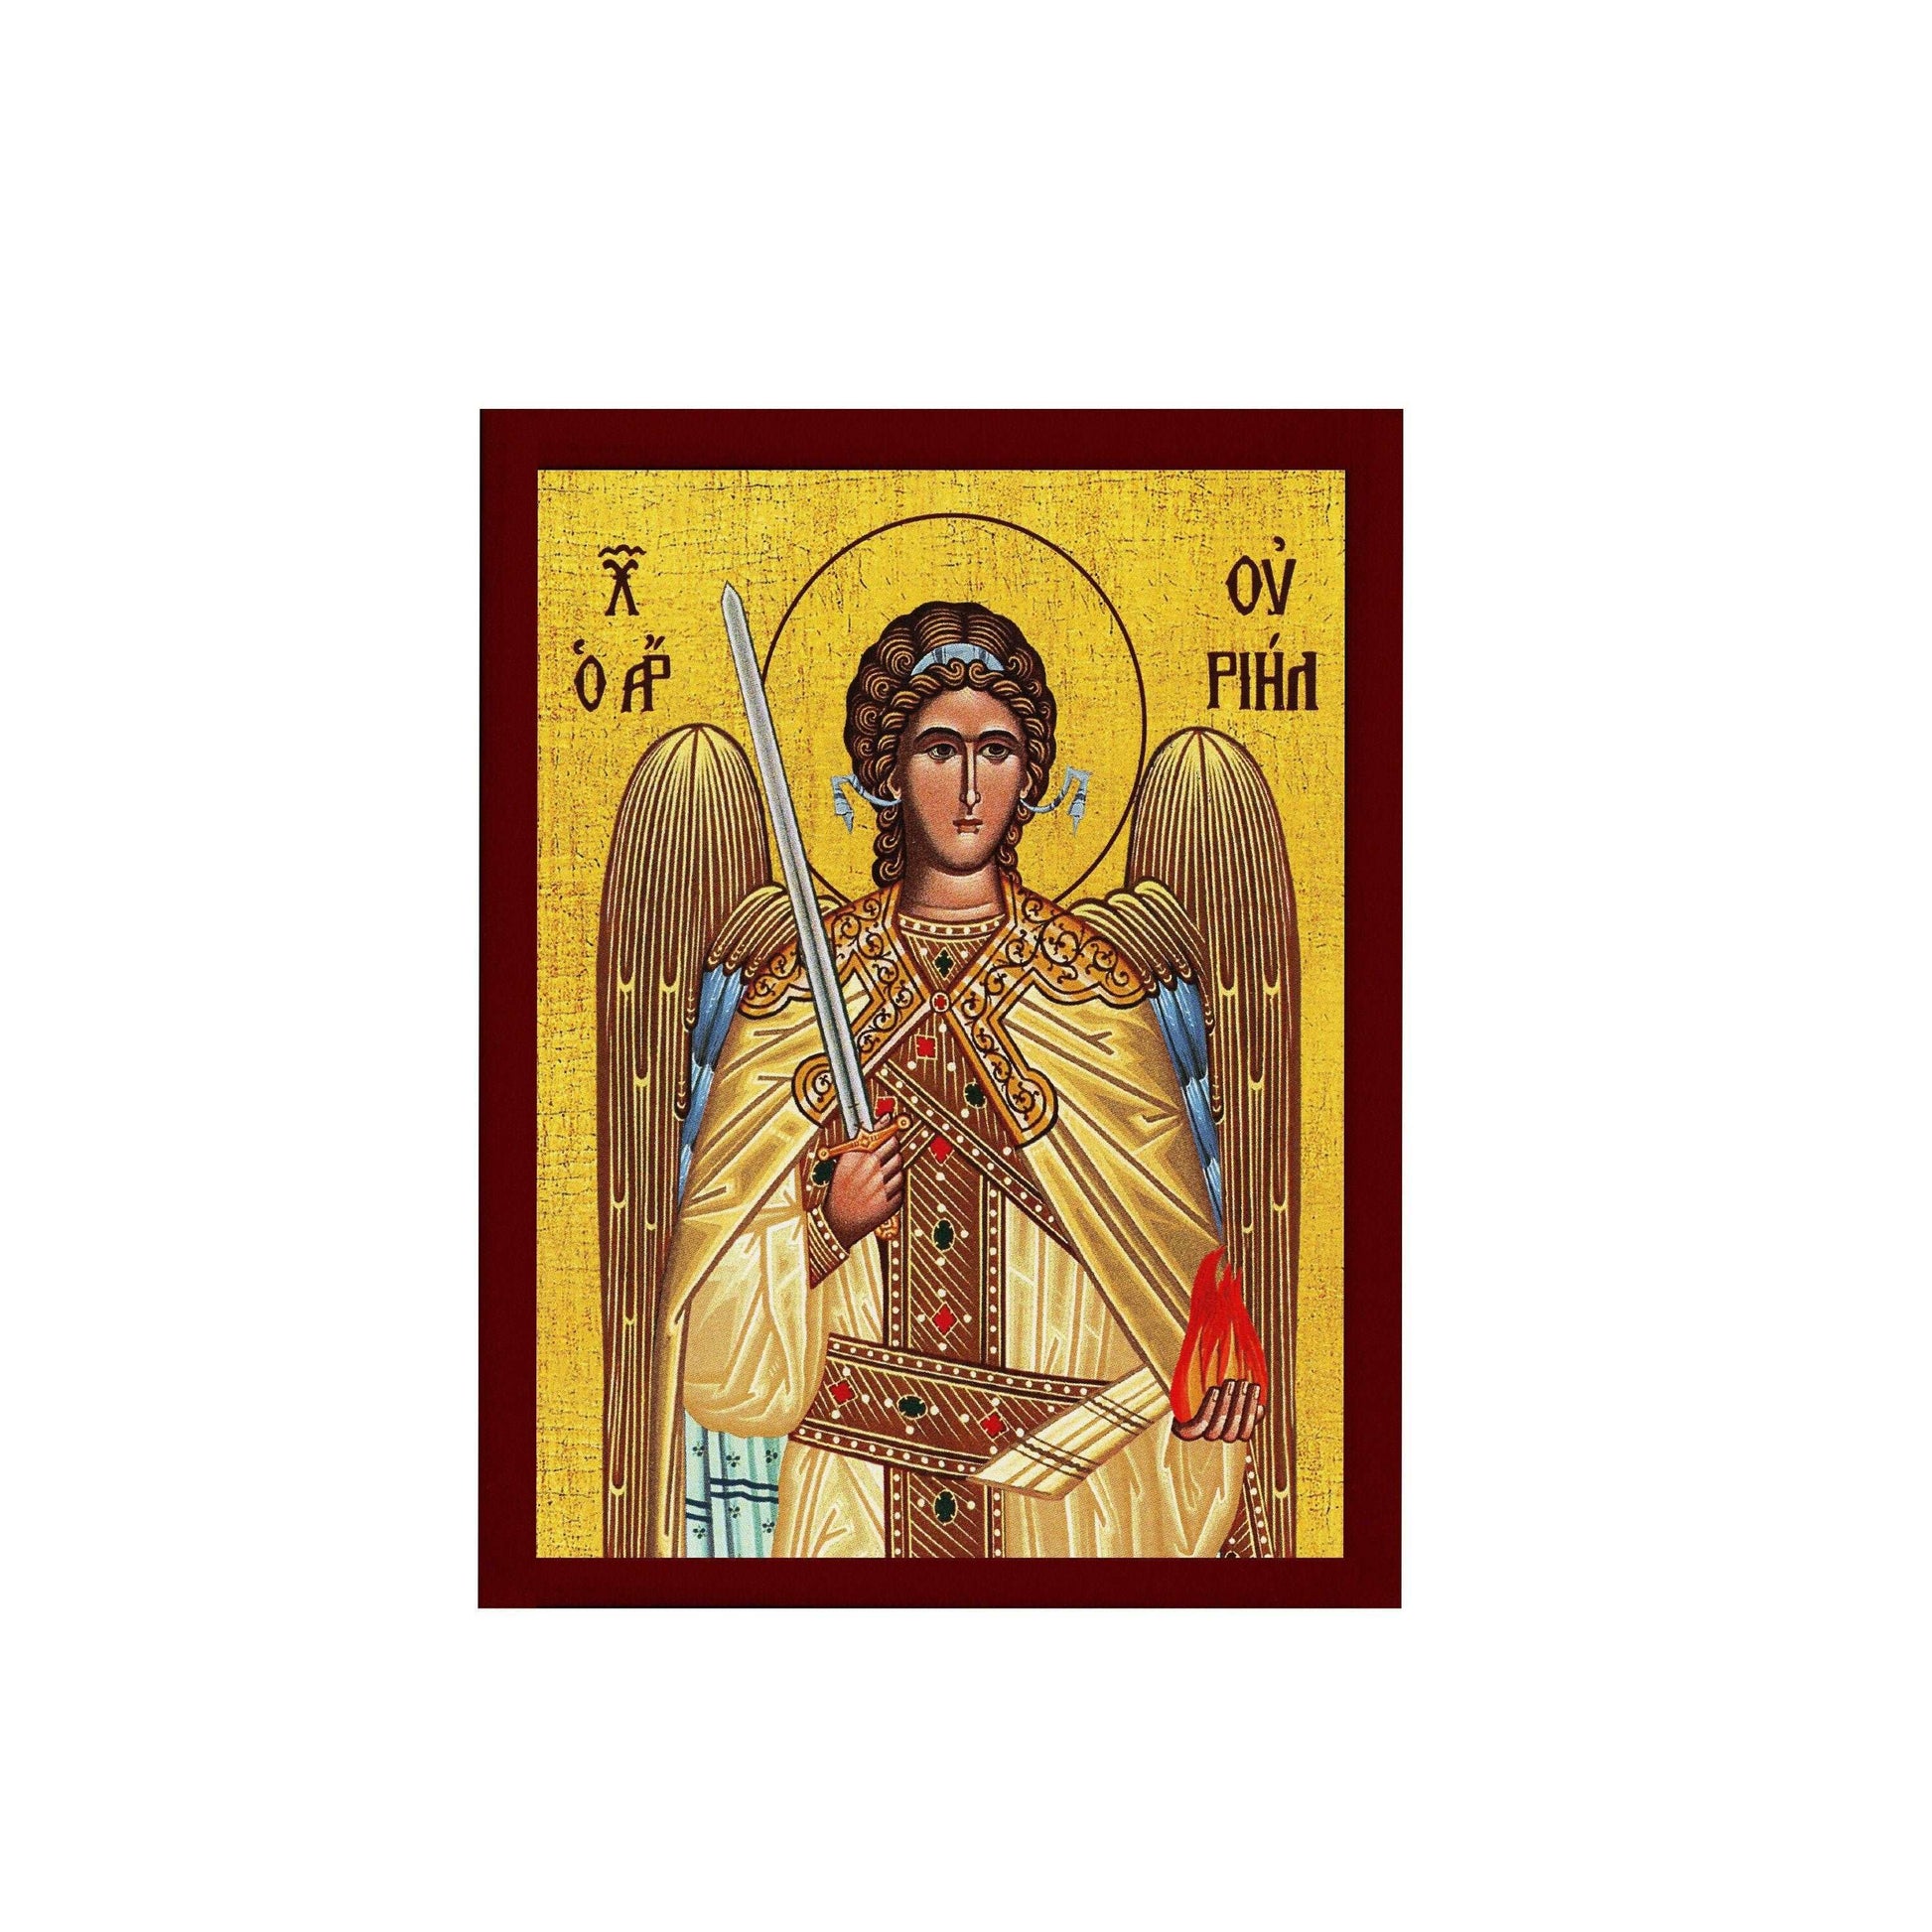 Archangel Uriel icon, Handmade Greek Orthodox icon of St Uriel, Byzantine art wall hanging on wood plaque religious icon, religious gift TheHolyArt